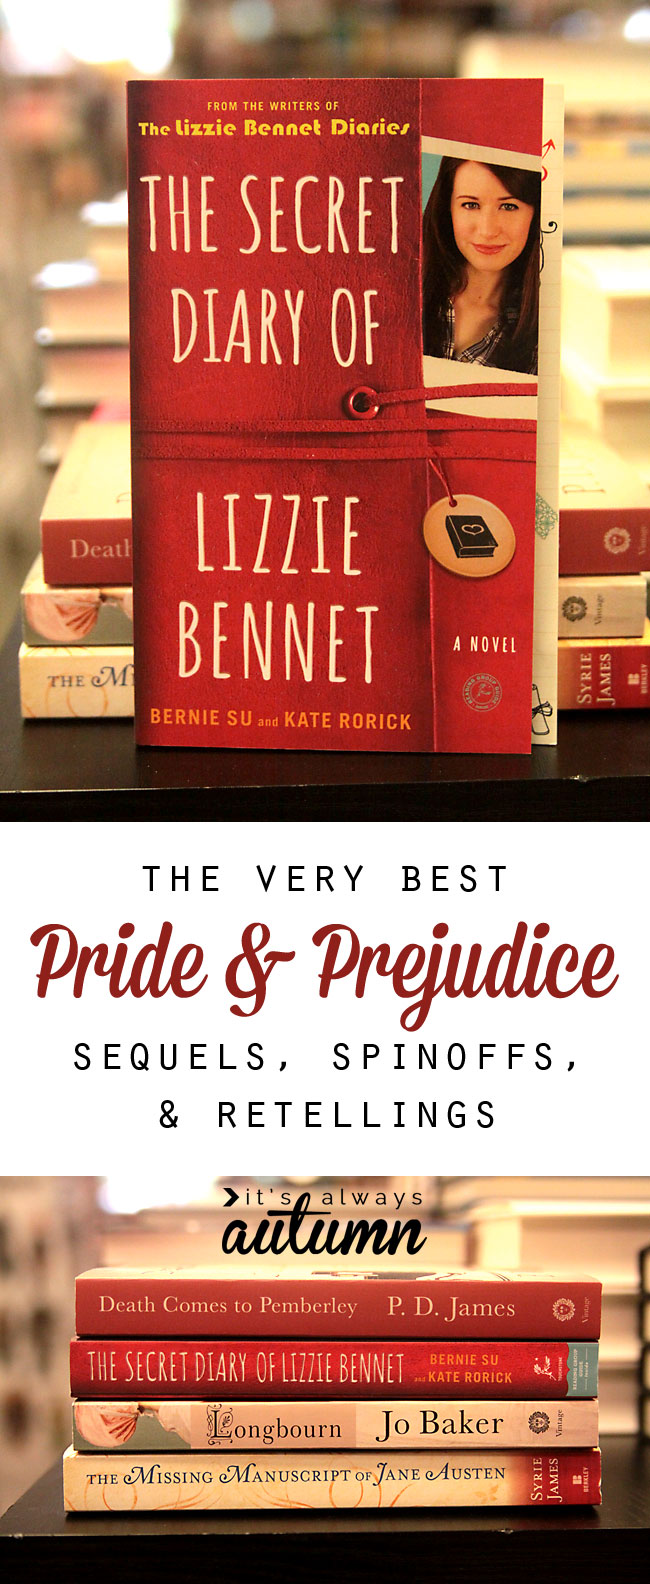 the best pride and prejudice inspired books for people who love jane austen! sequels, spinoffs, and retellings